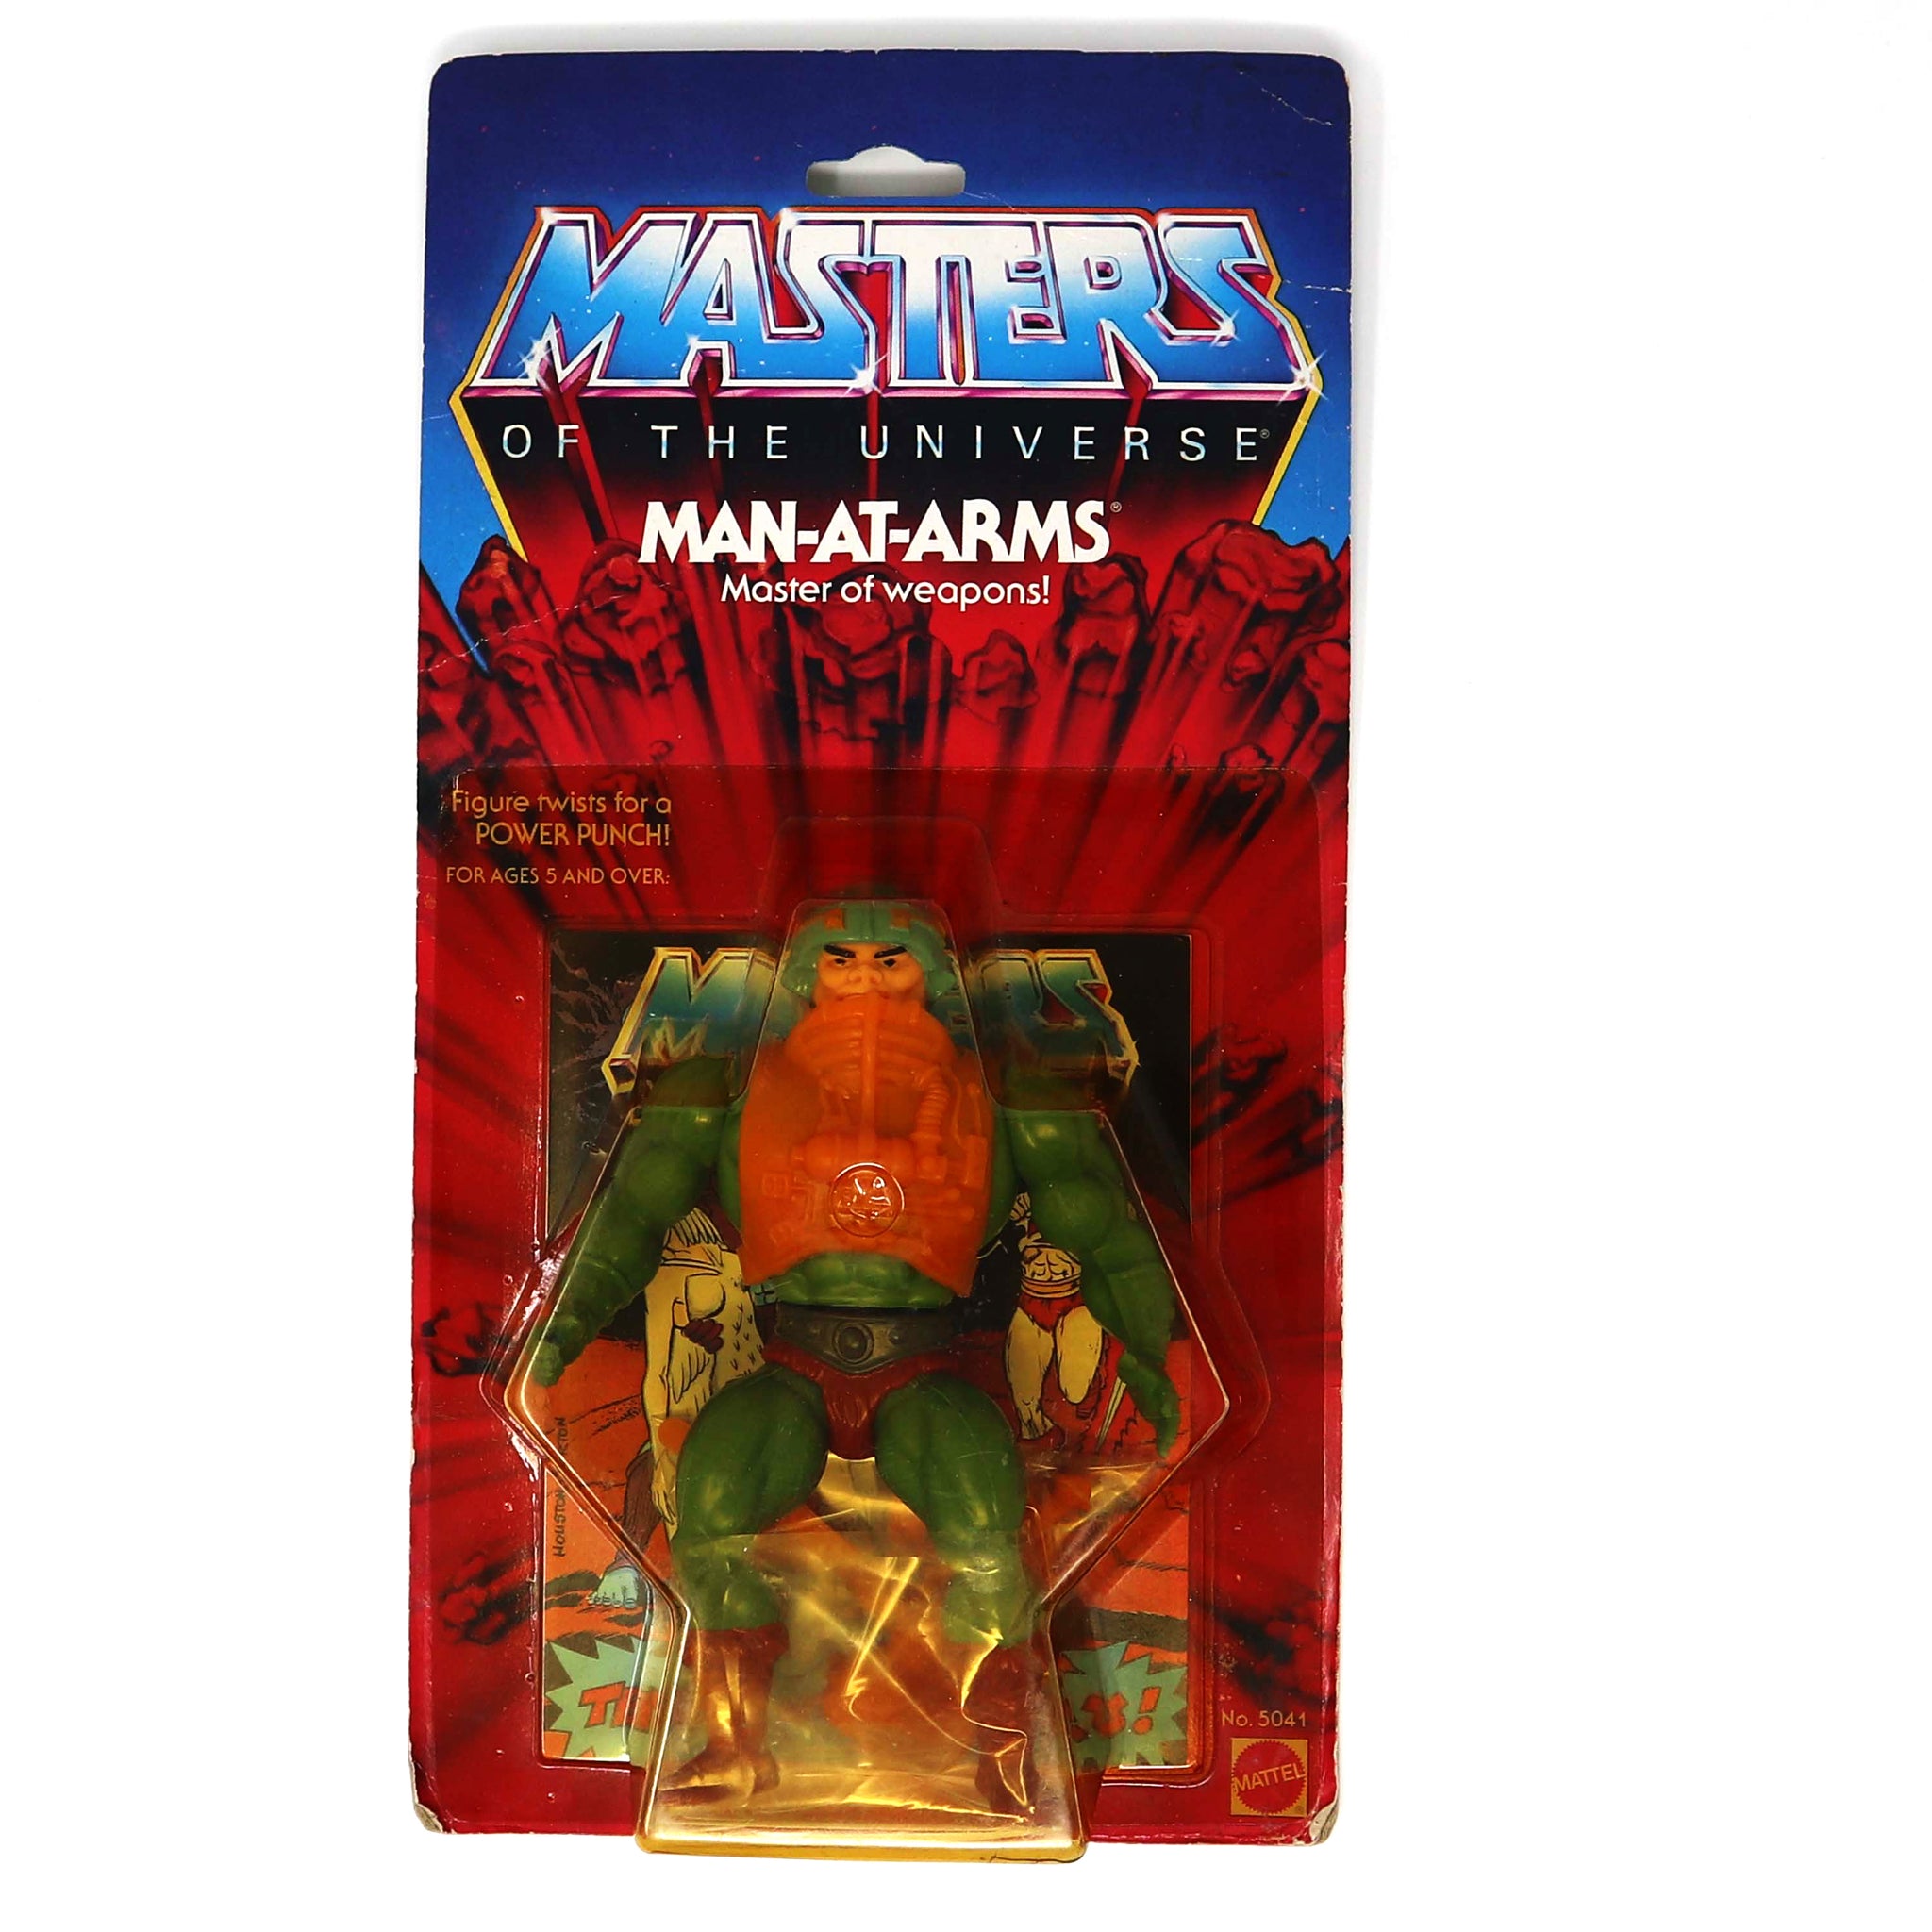 Vintage 1982 Mattel He-Man MOTU Masters Of The Universe Original Series Man-At-Arms Action Figure Carded MOC Rare